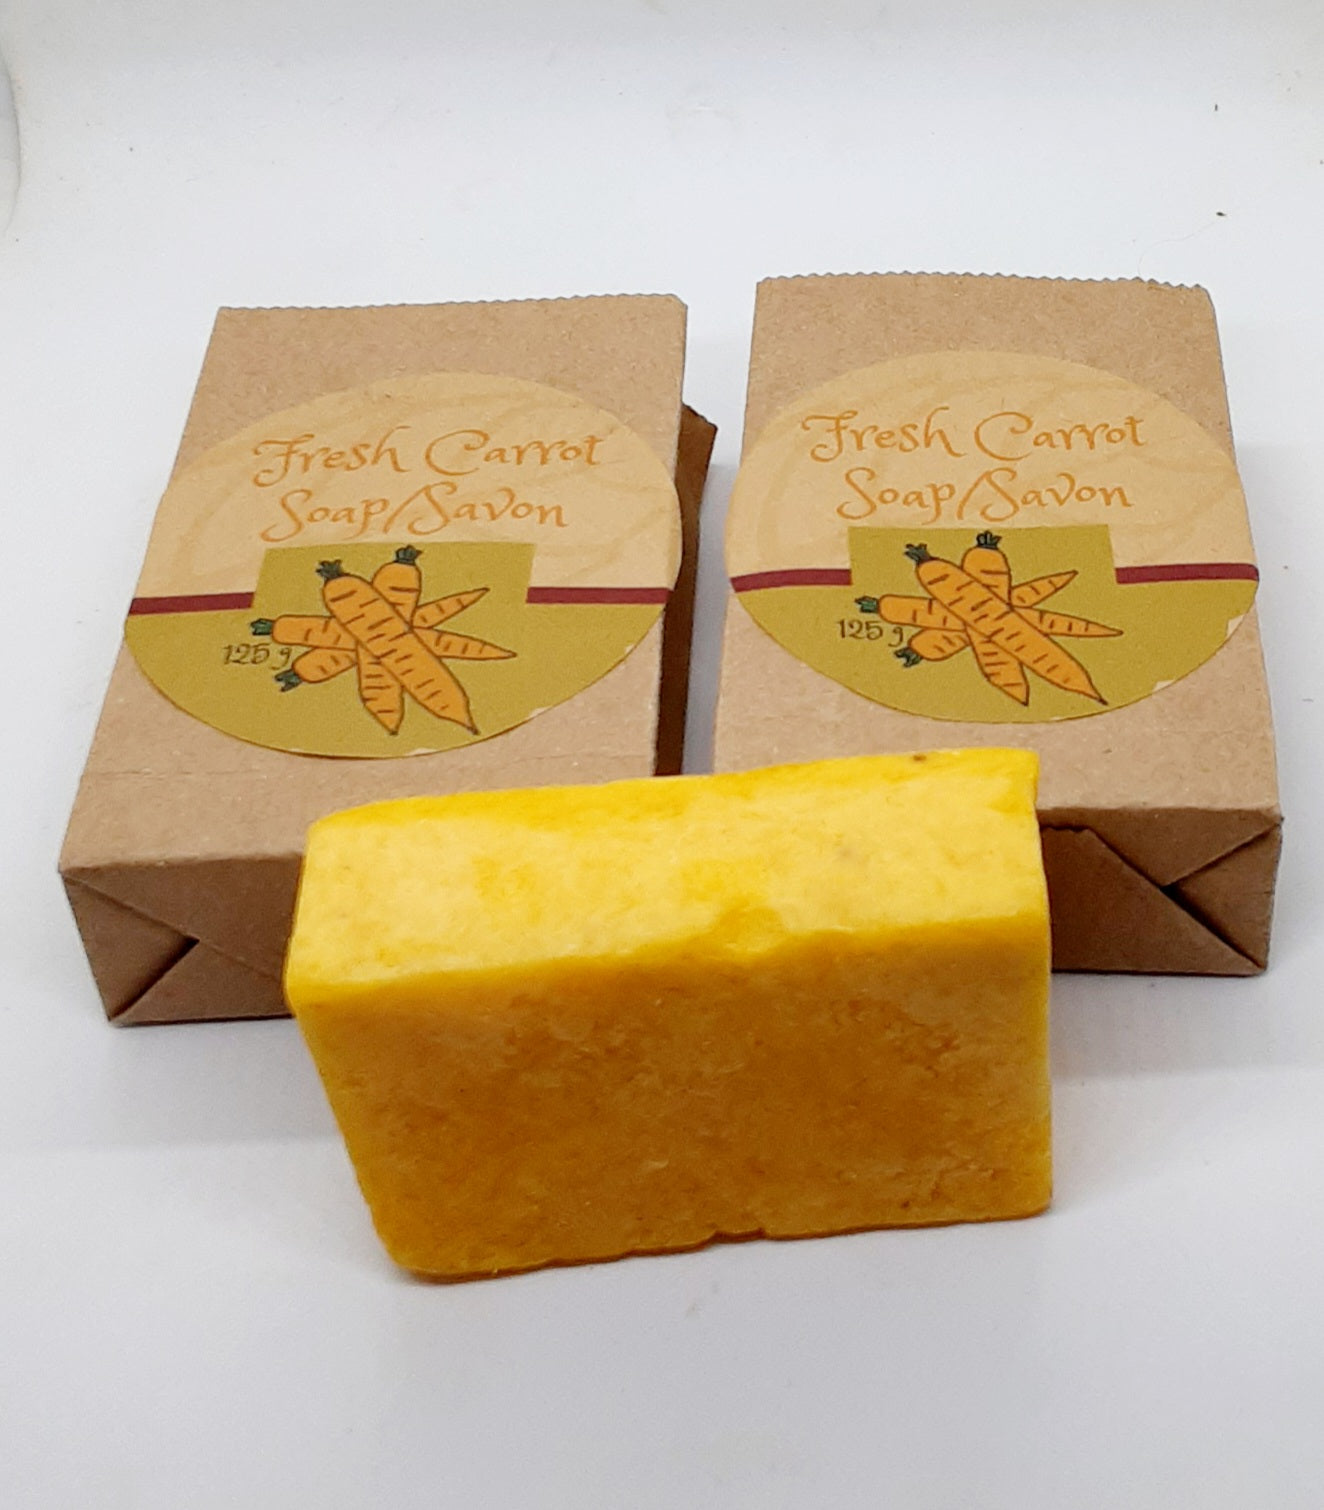 Hand Milled Market Fresh Carrot Soap Made with Real Carrots - Mature Skin Friendly!